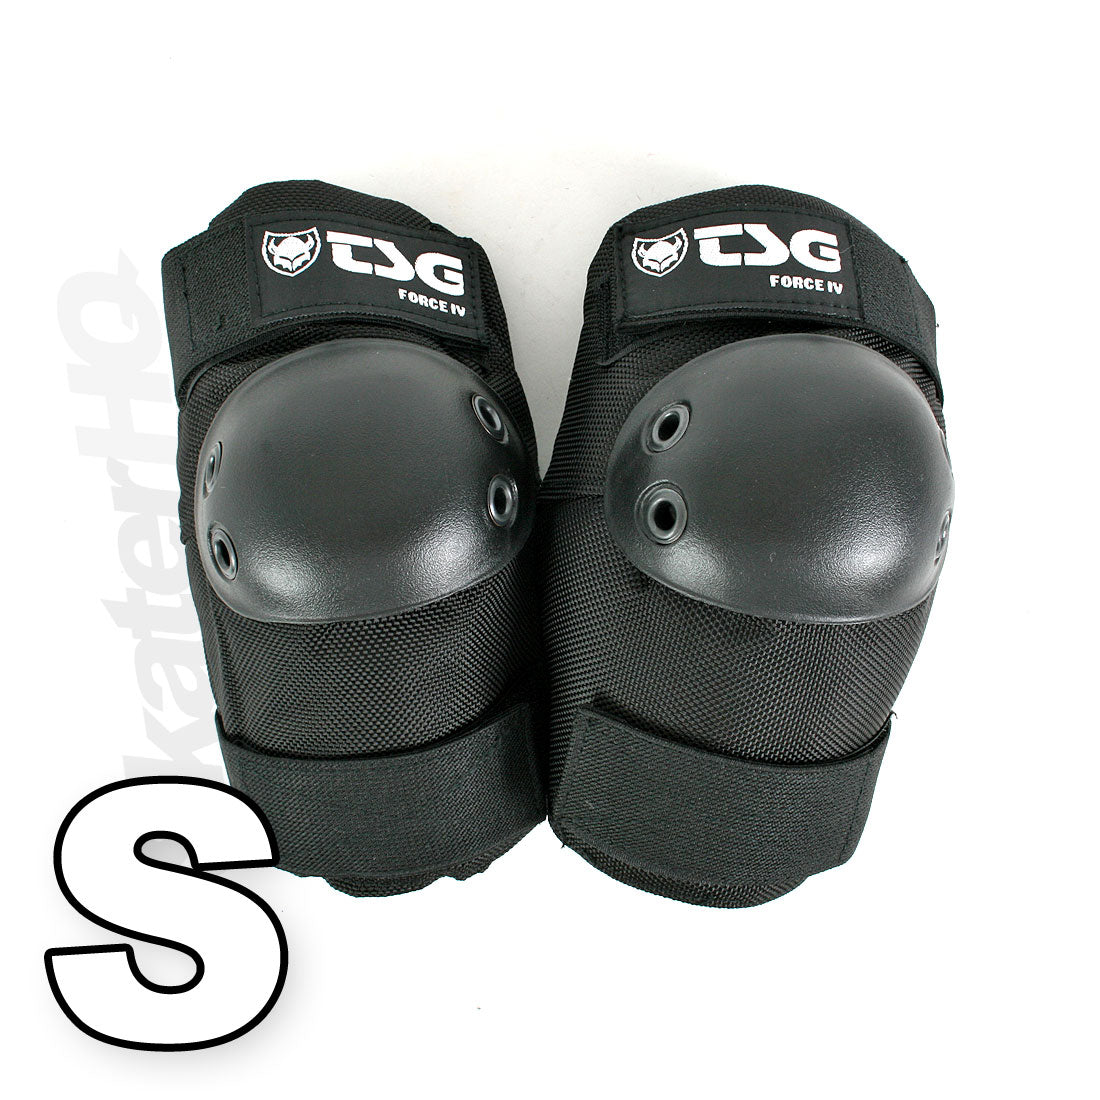 TSG Force IV Elbow Pad Black S Protective Gear